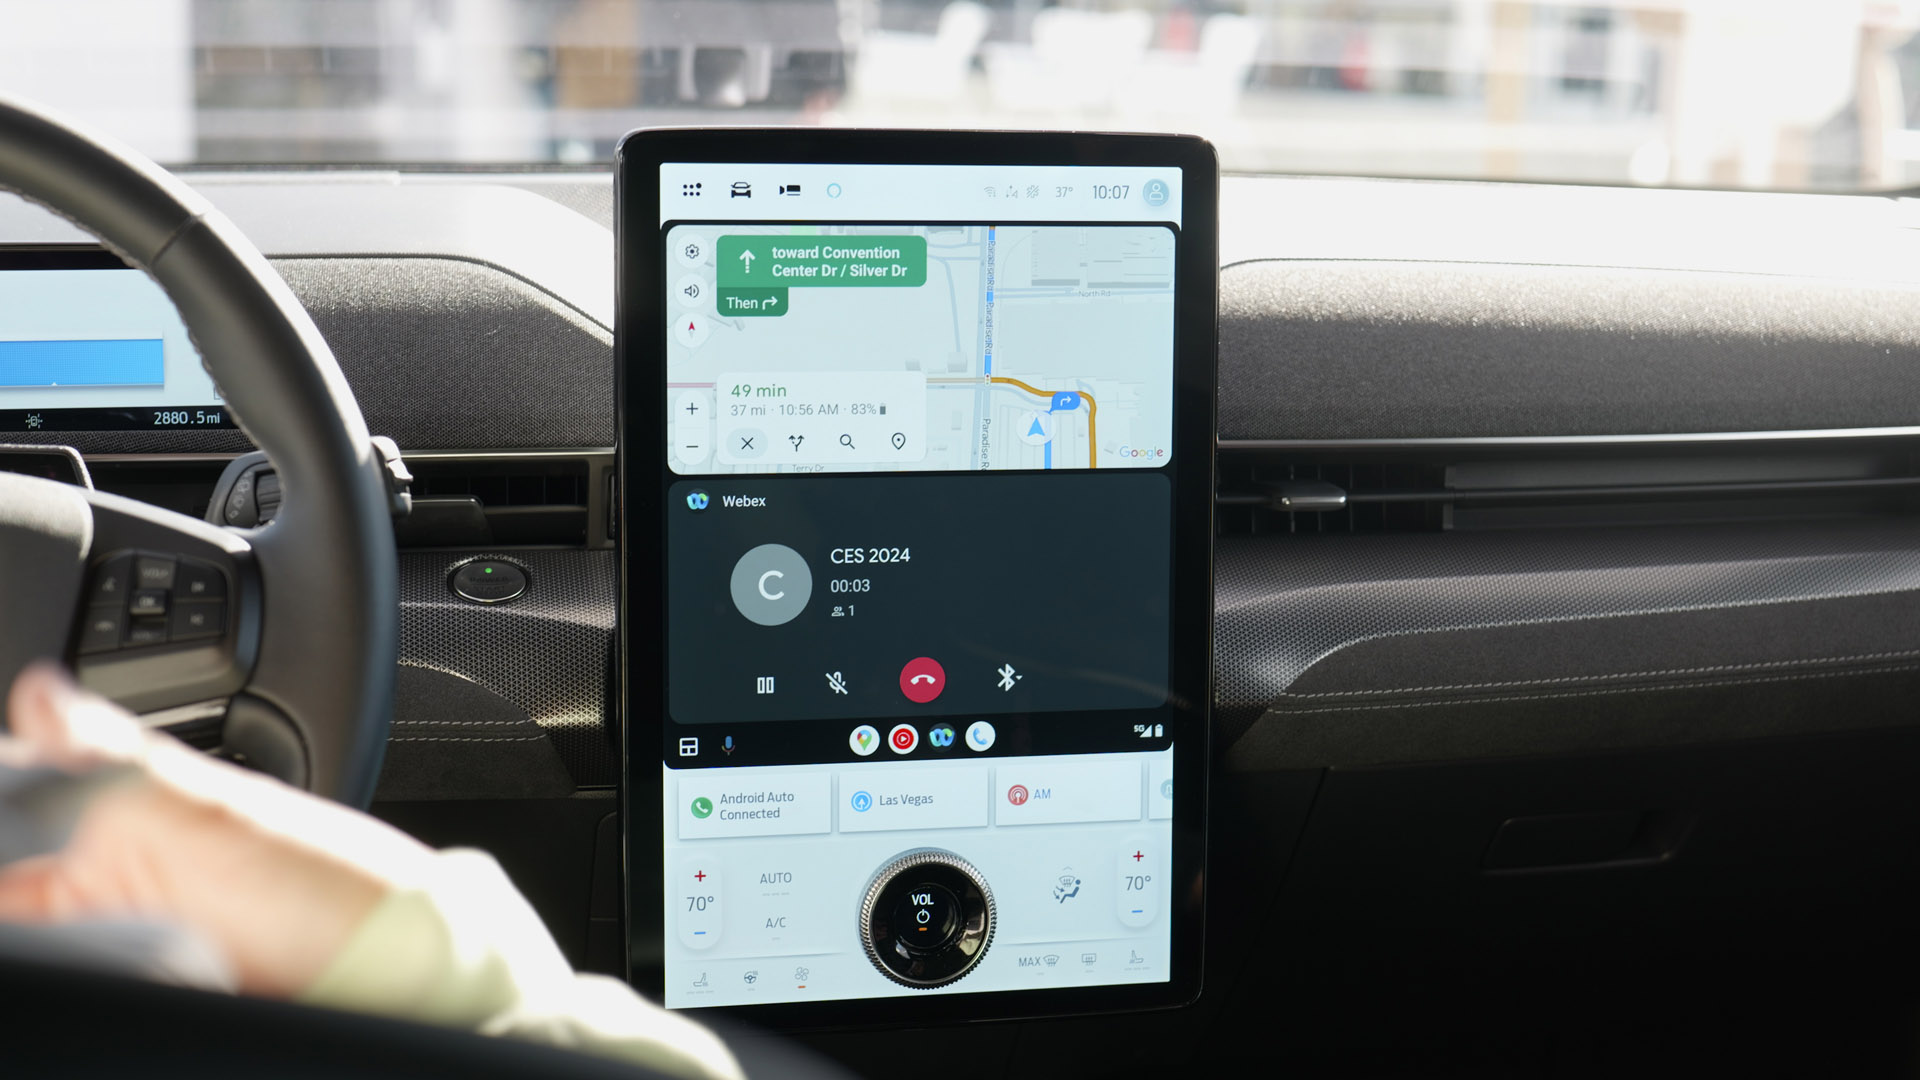 Conference calling in Android Auto